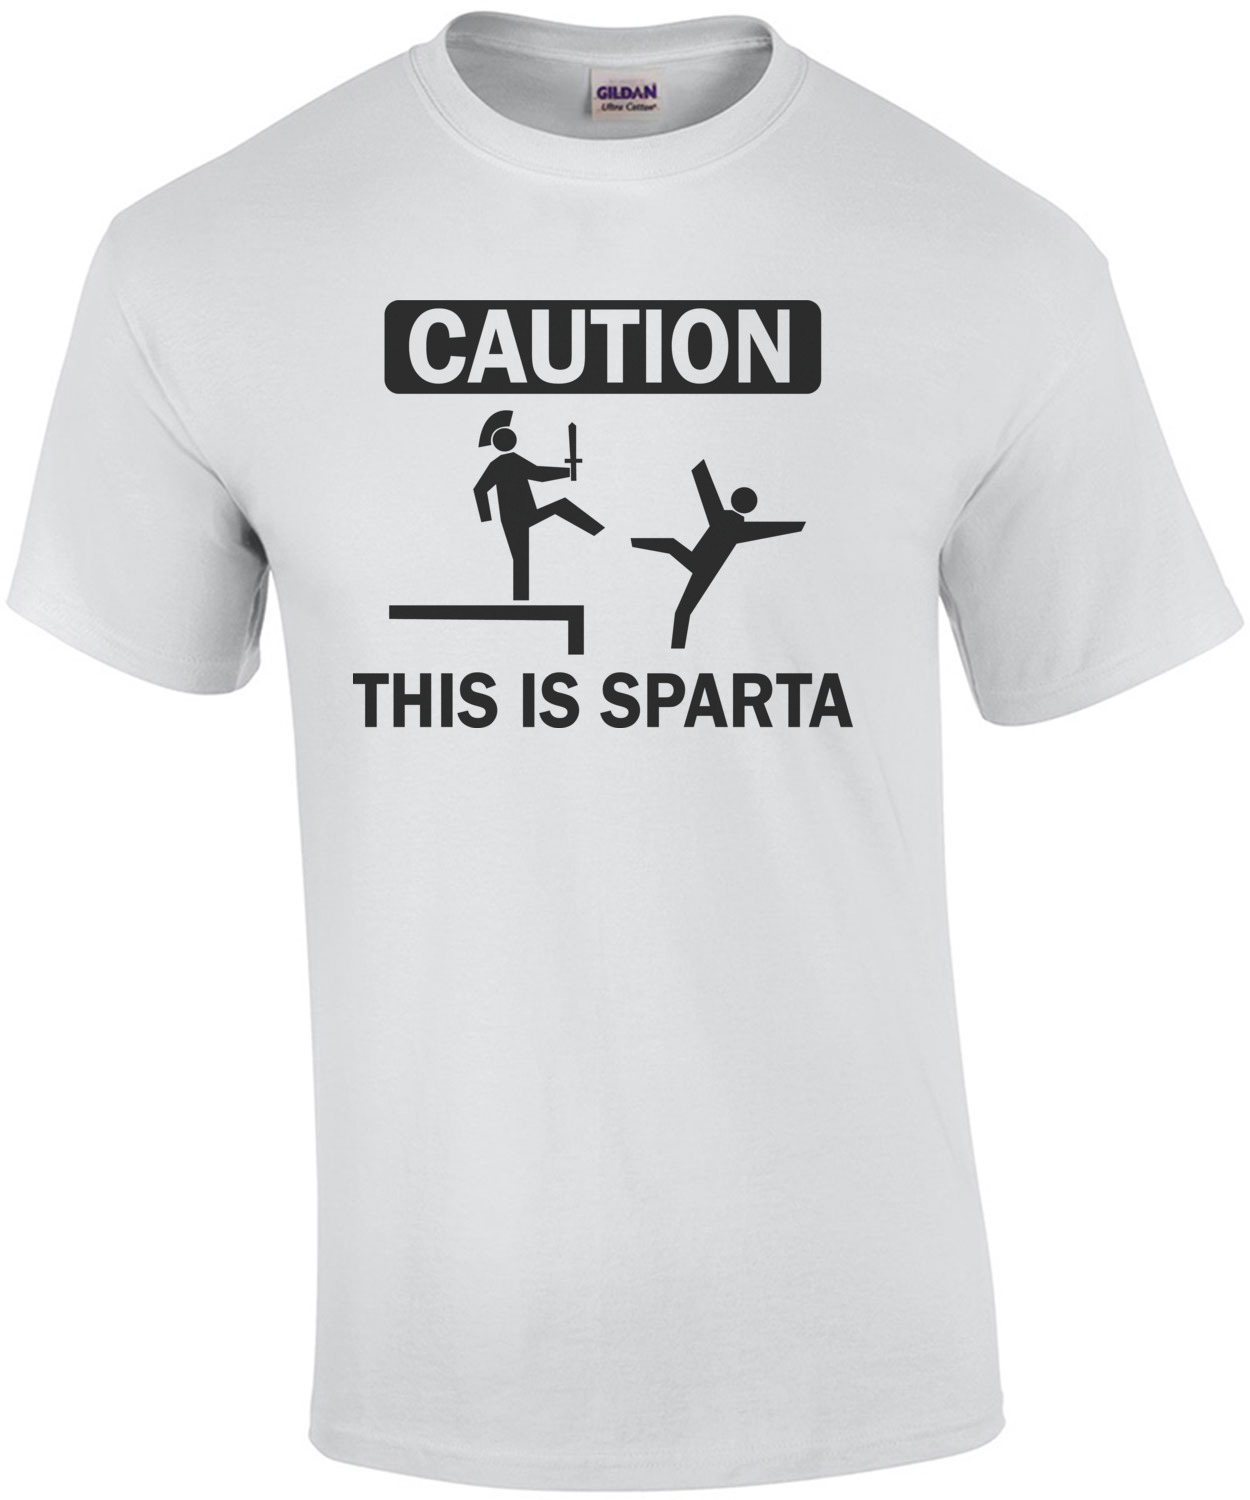 Caution This Is Sparta Parody Mens Funny Novelty T Shirt Christmas Birthday Gift 